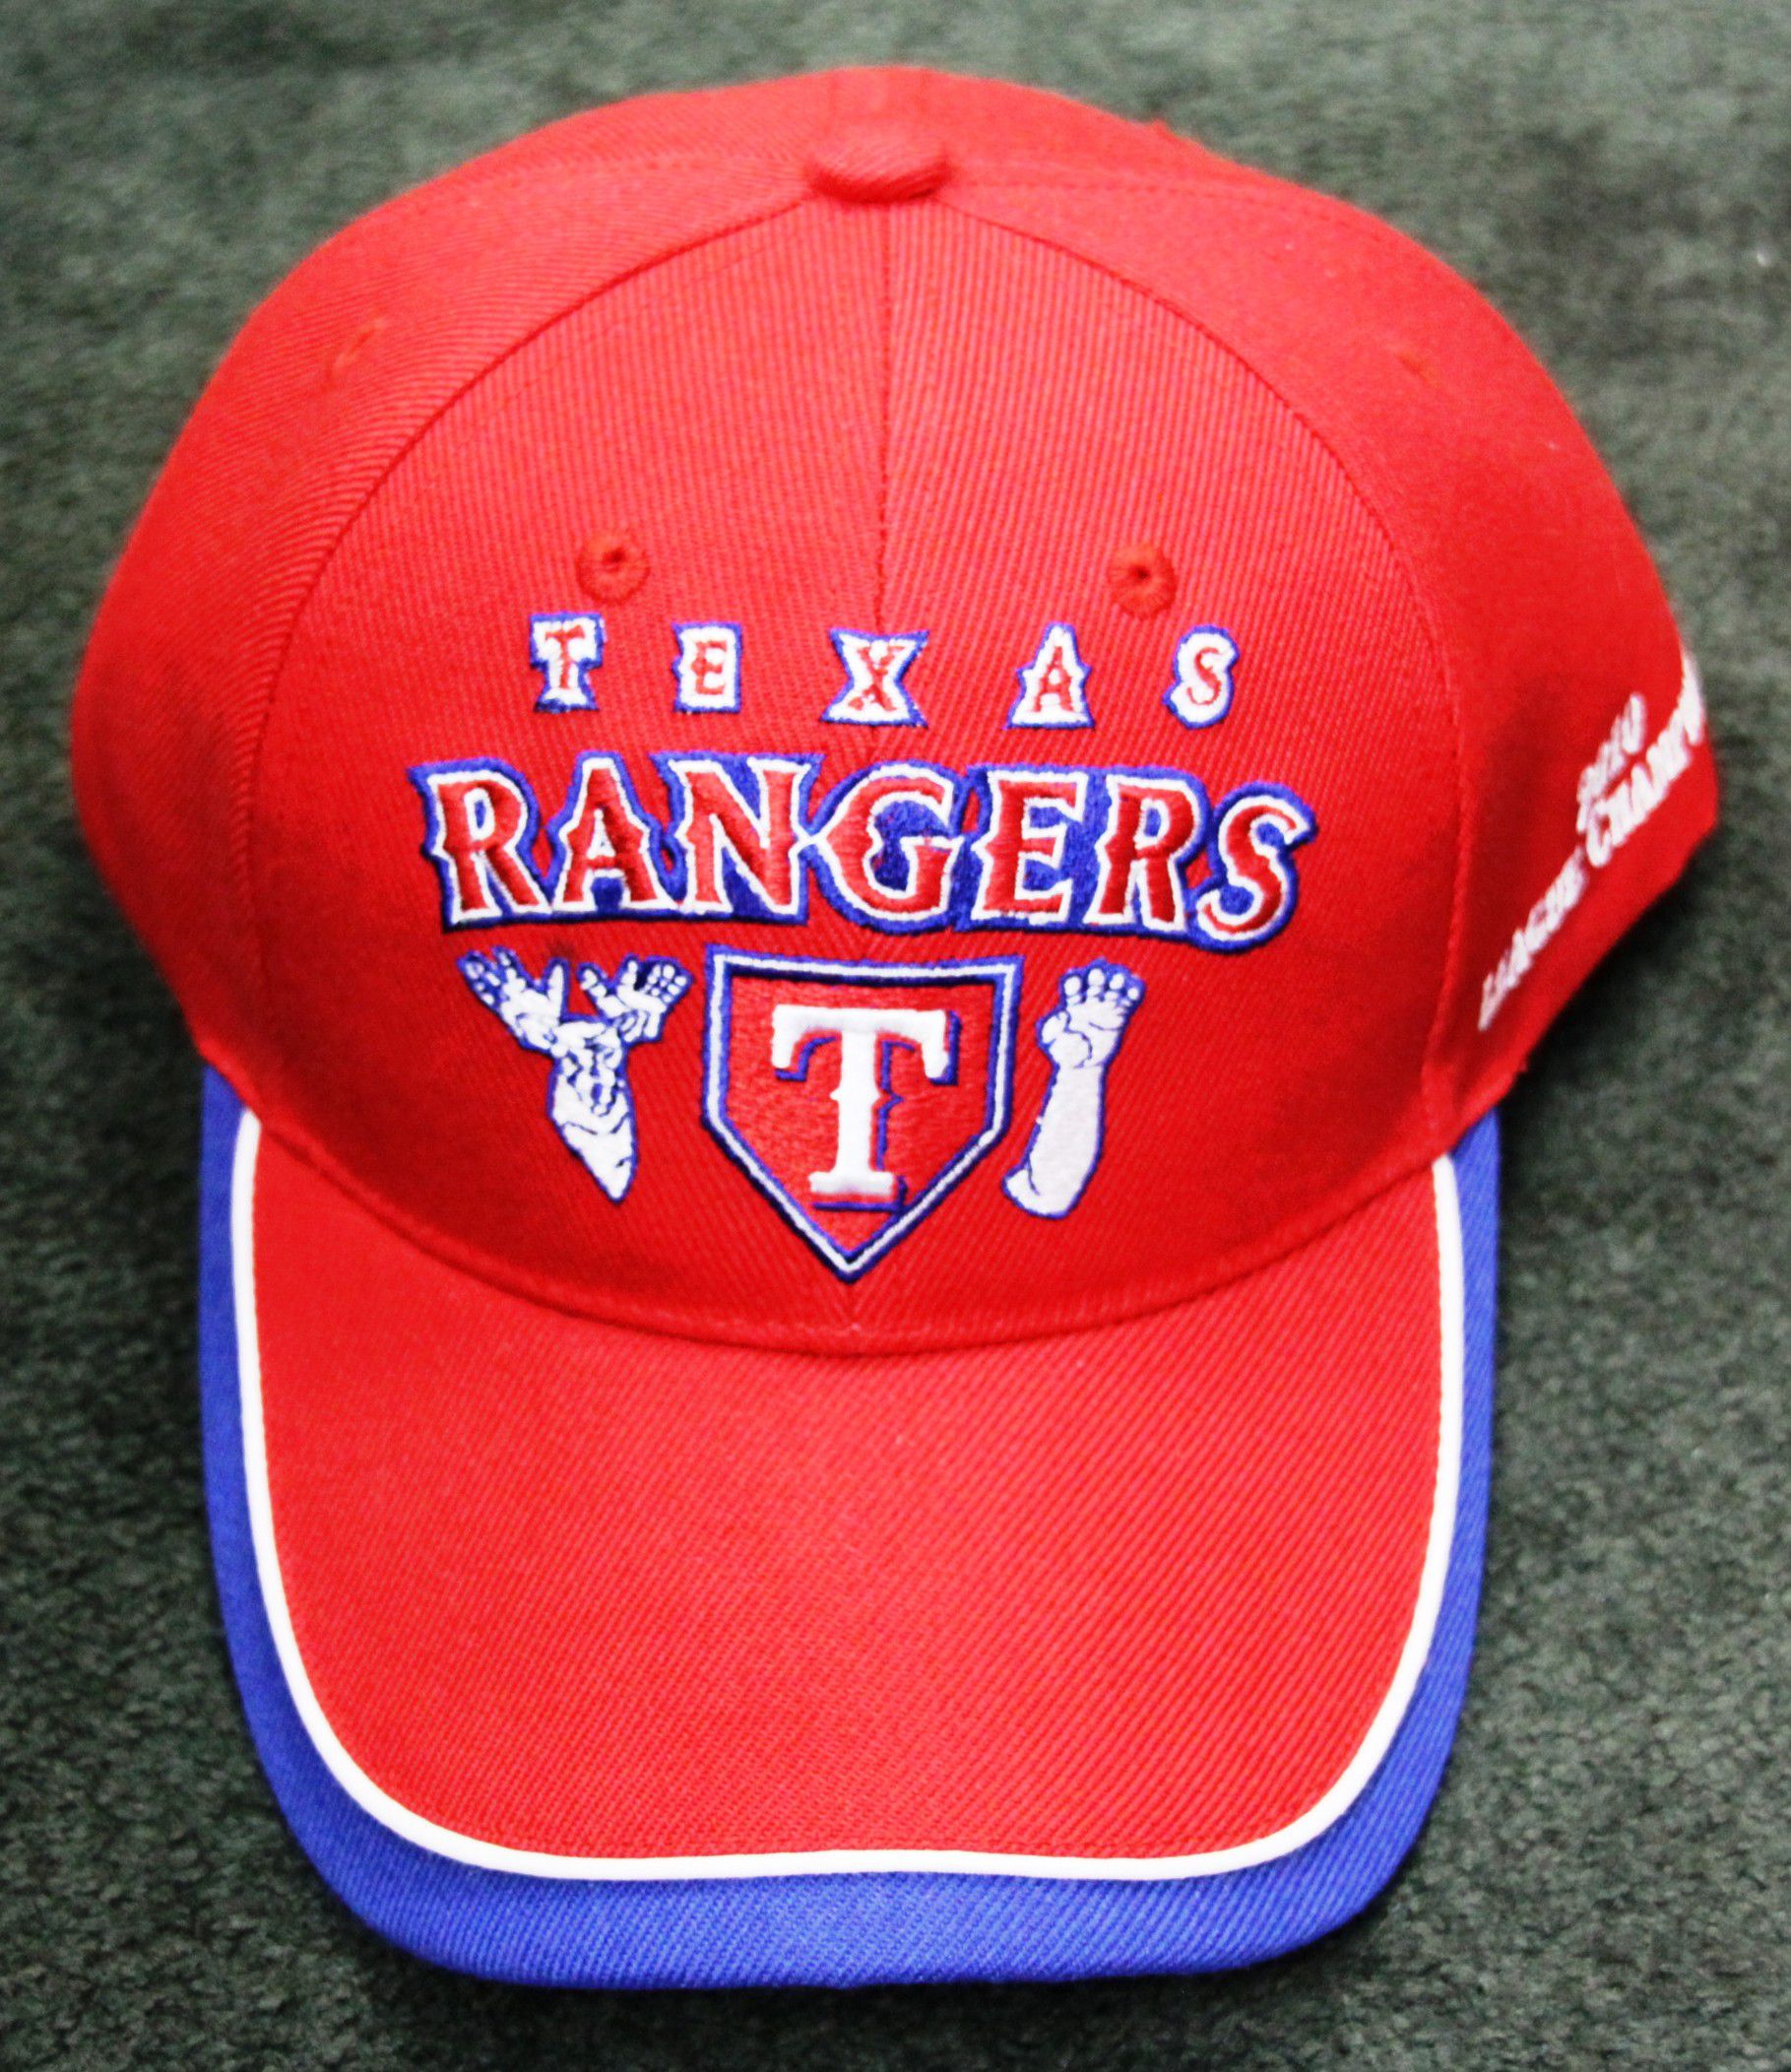 Rangers 2011 promotions: When fans get free oven mitts, swim floats and  replica rings